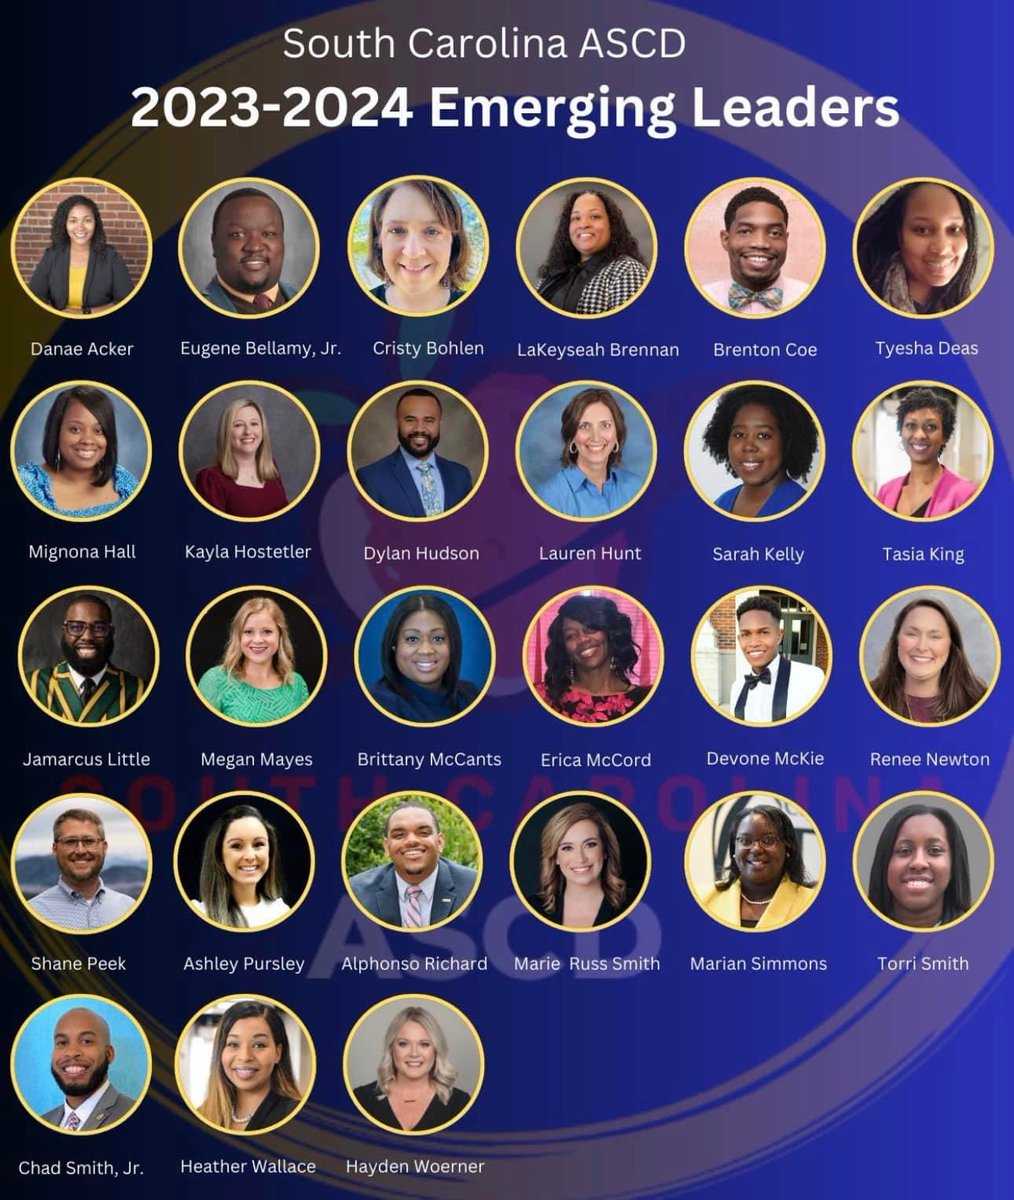 Wade Hampton High School congratulates our very own Ms. Brittany McCants on her selection to the South Carolina ASCD Emerging Leaders Class of 2023 - 2024. Ms. McCants serves as our 11th Grade Administrator! 

#LeadingLikeGenerals #loveSCschools #scascdEL @B__McCants @SCASCD